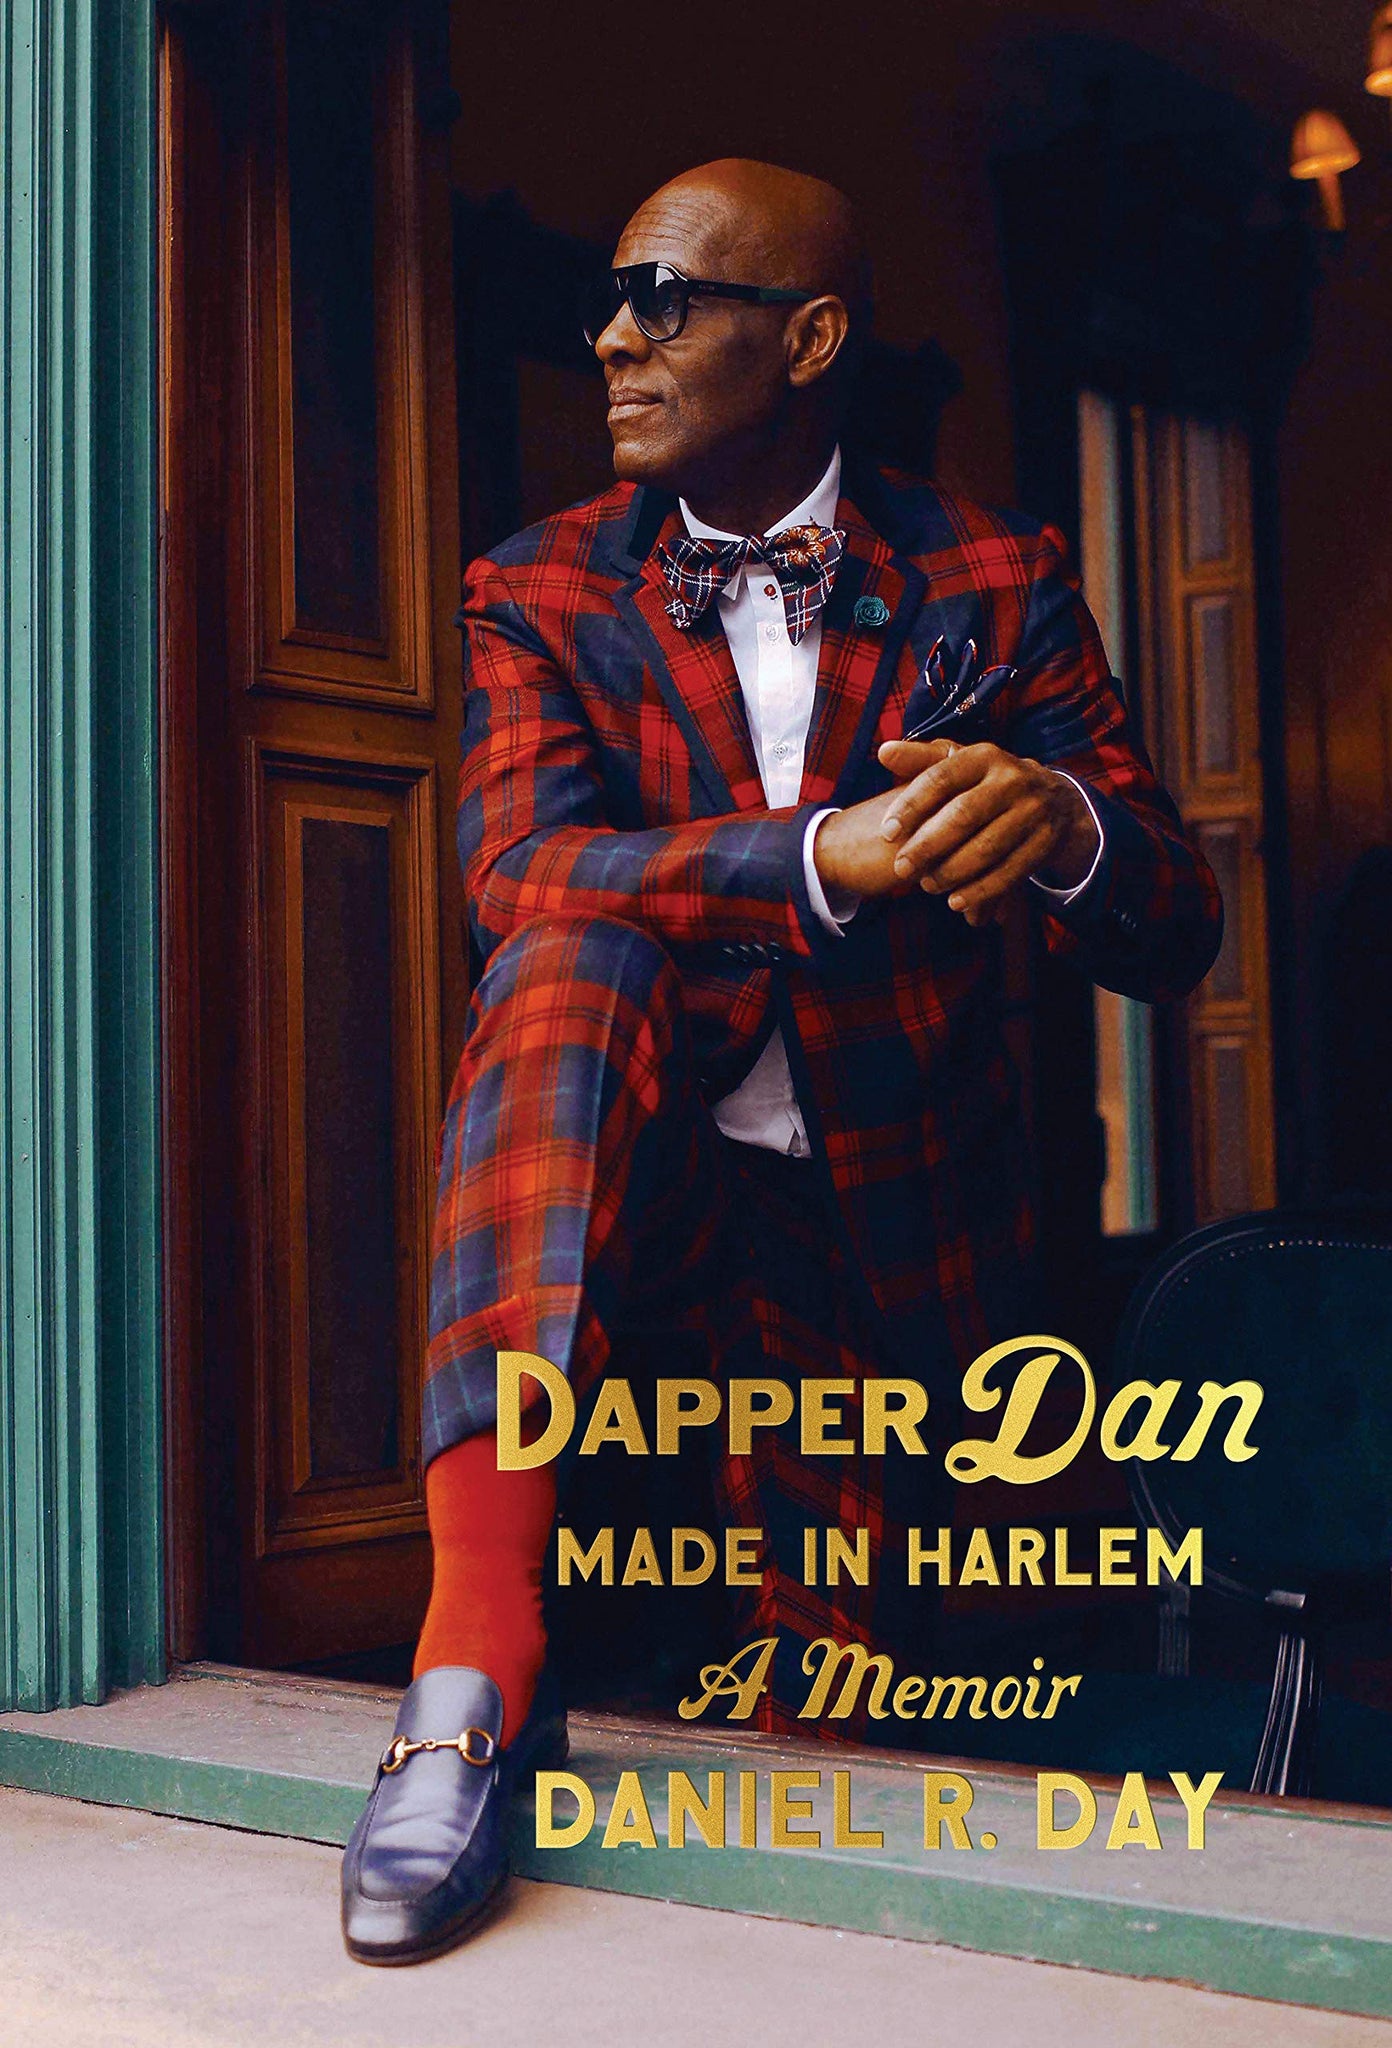 THE DAPPER DAN'S INFLUENCE on TODAY'S FASHION